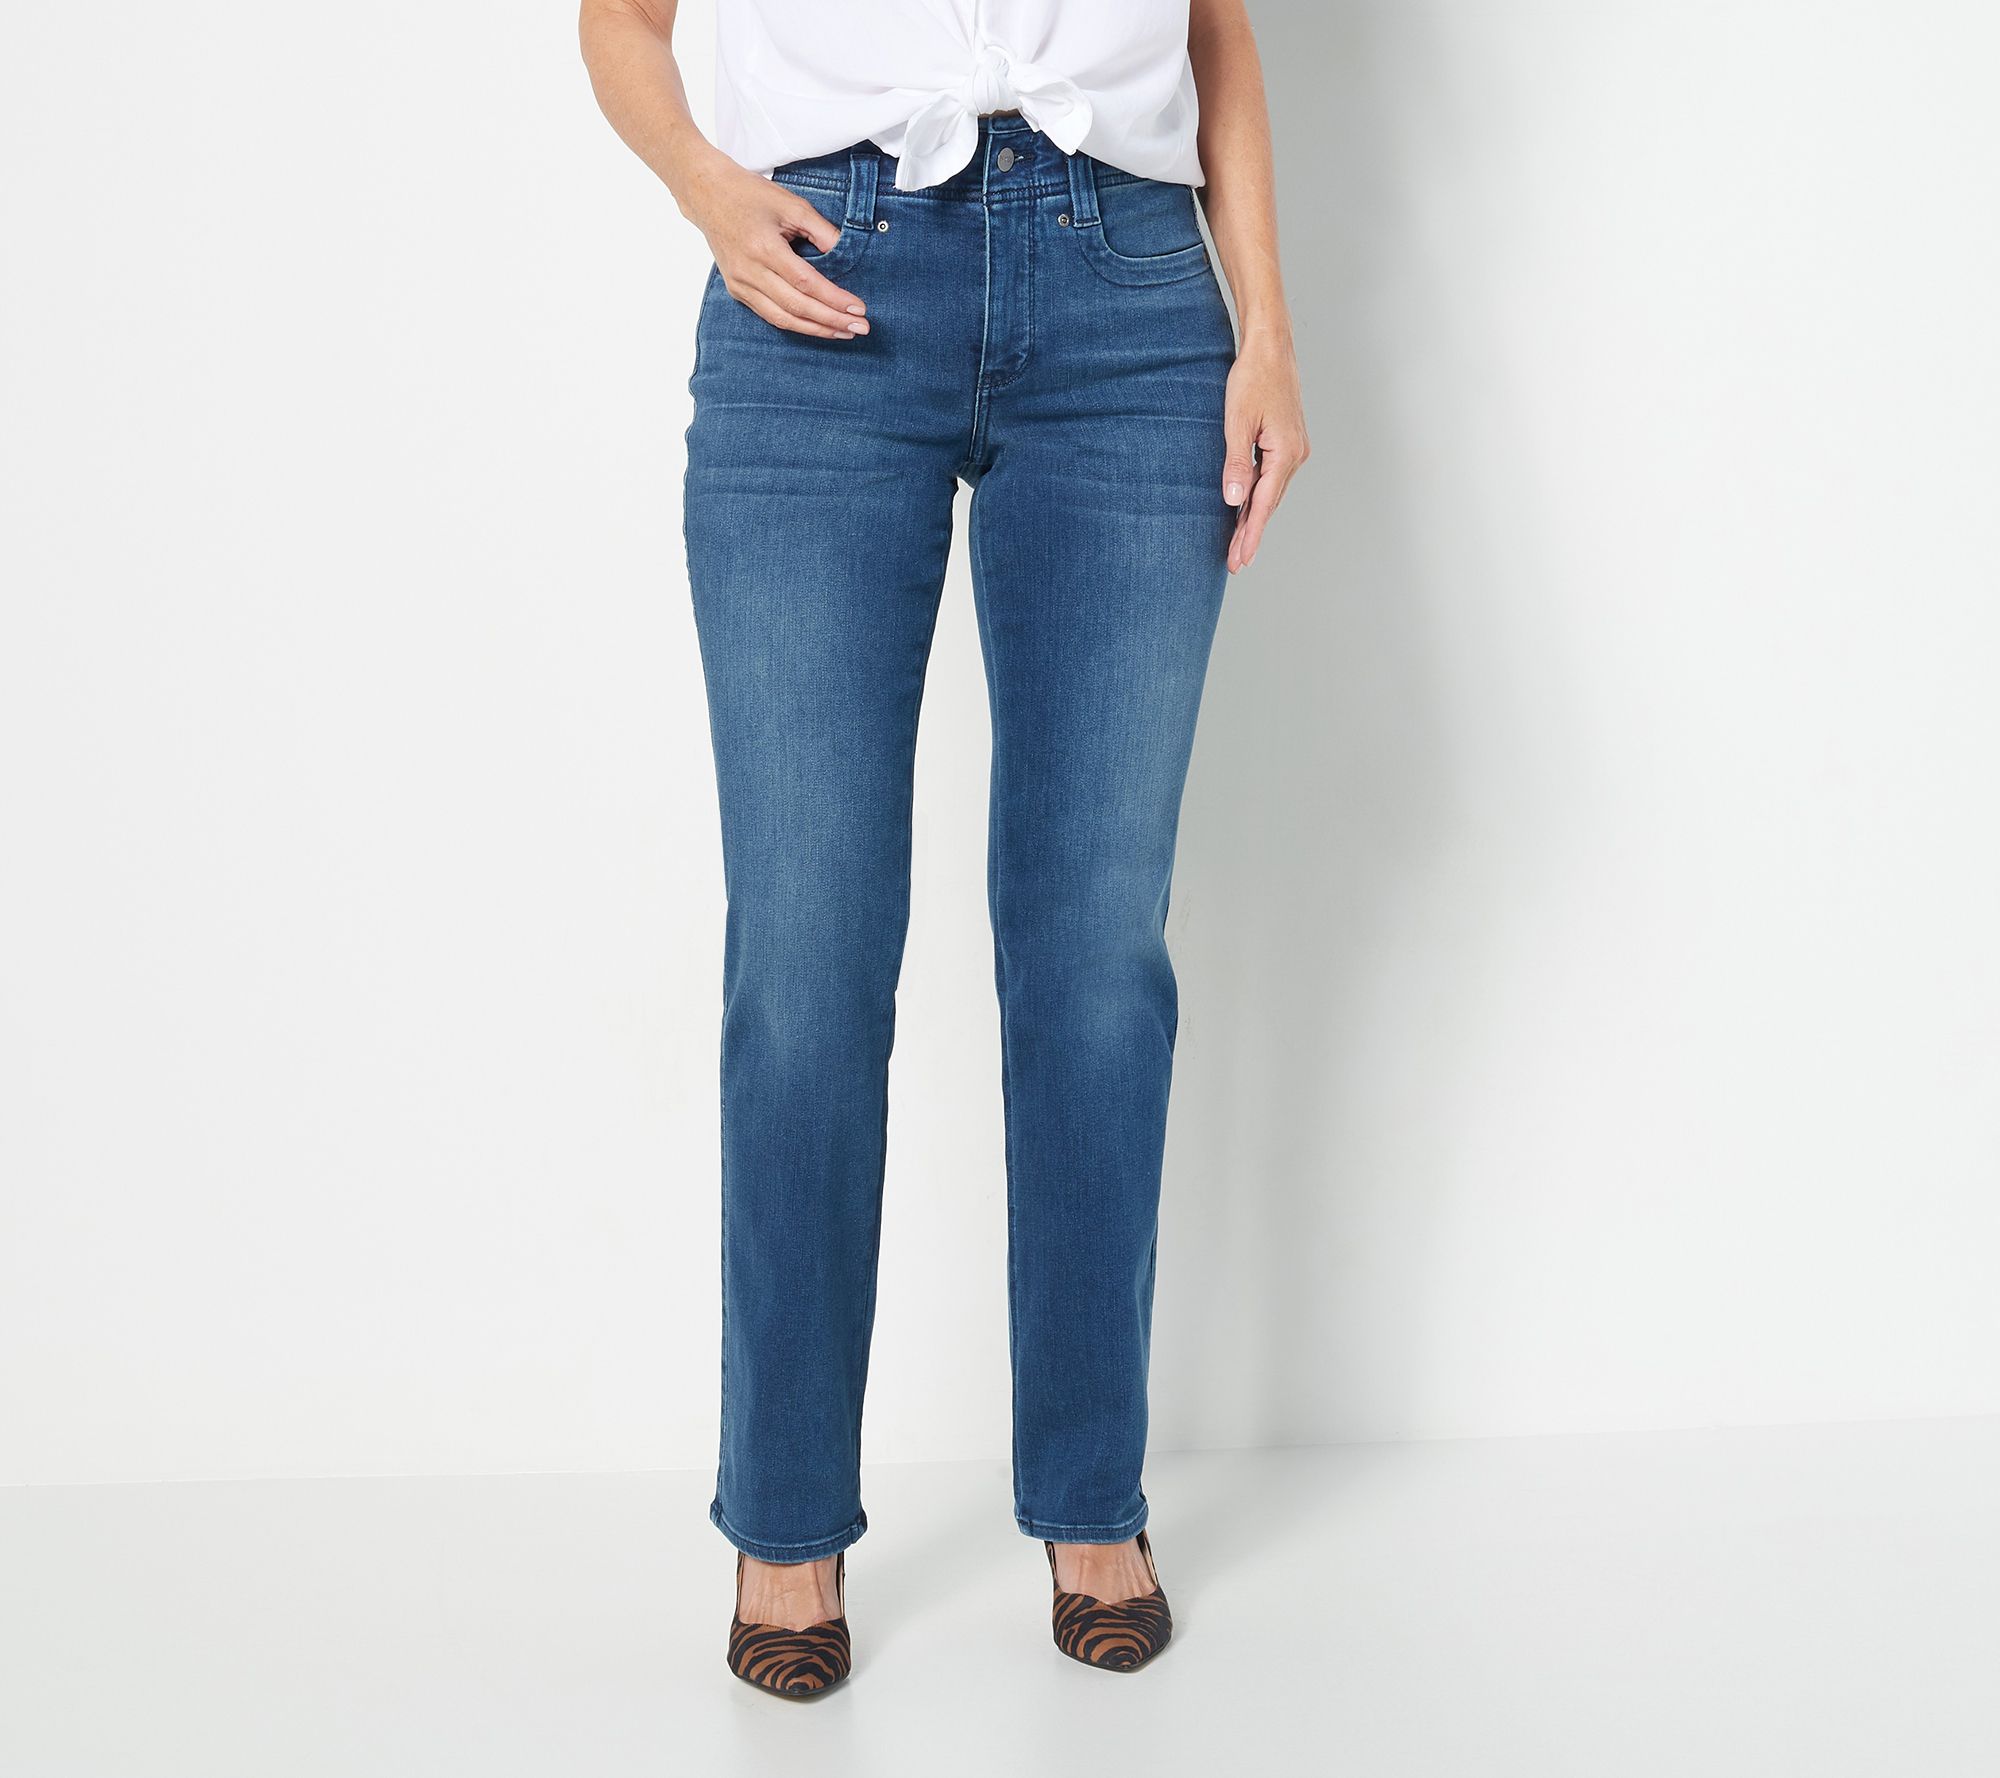 NYDJ Marilyn Straight Higher Rise Ankle Jeans- Saybrook - QVC.com